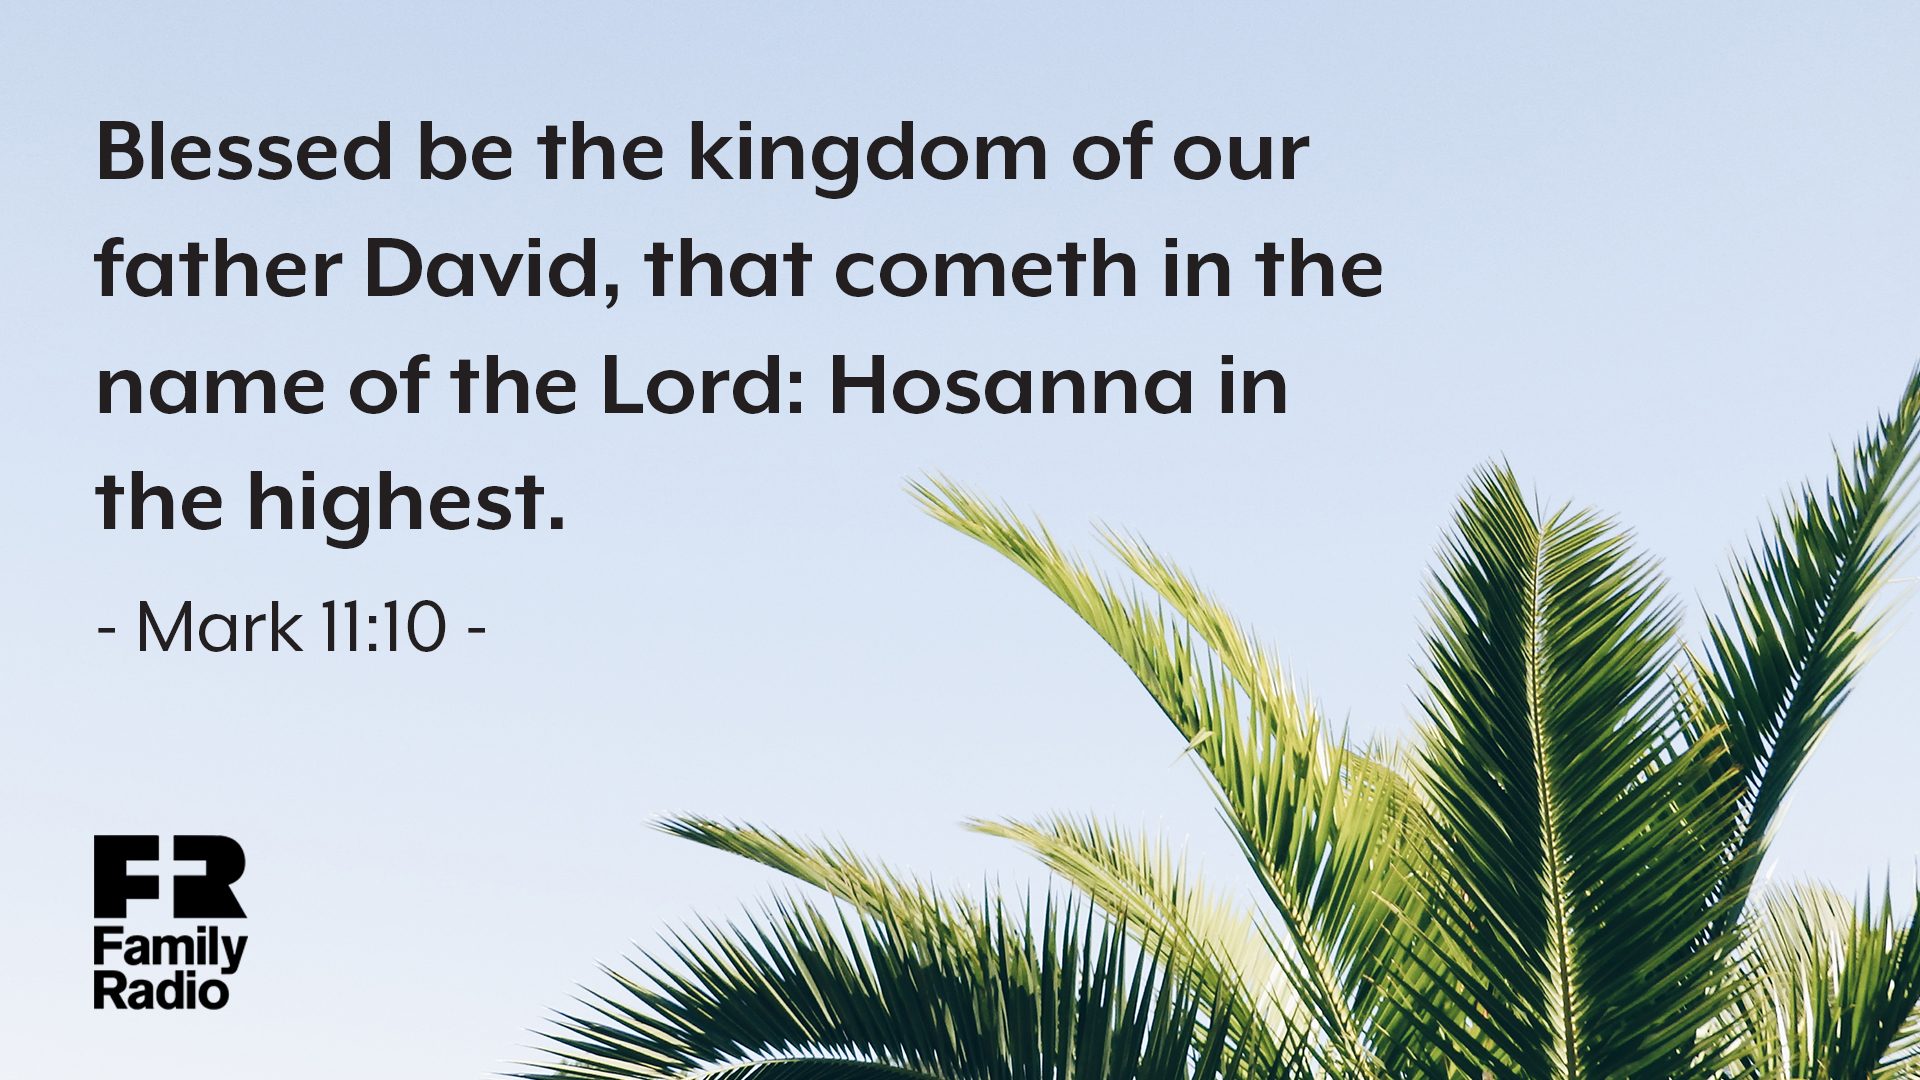 "Blessed be the kingdom of our father David, that cometh in the name of the Lord: Hosanna in the highest."